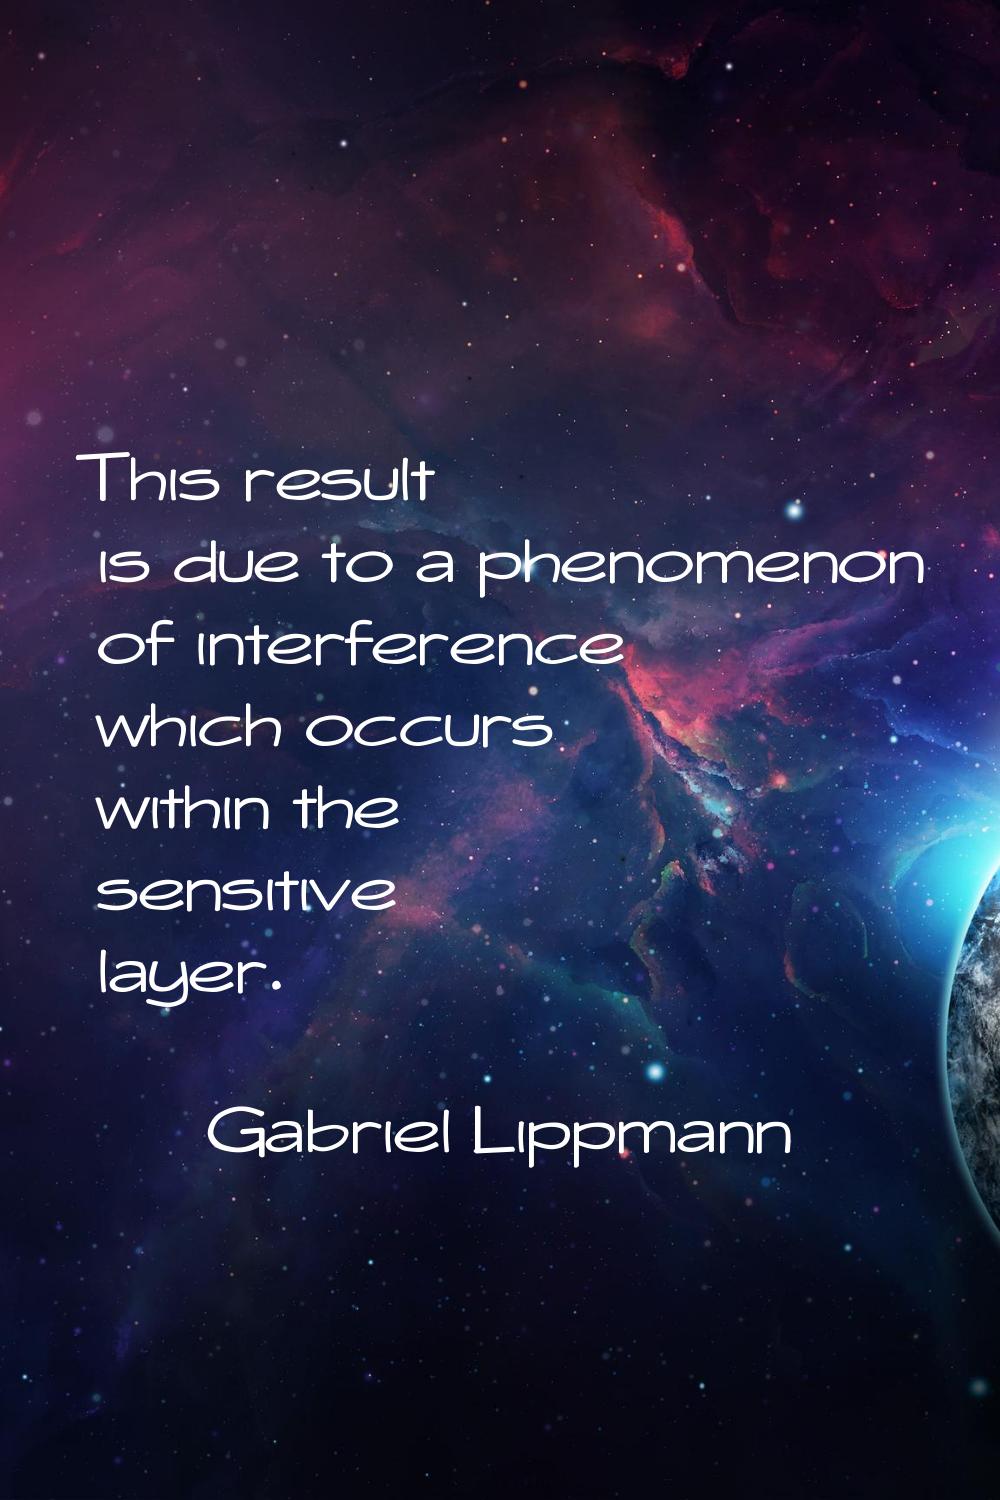 This result is due to a phenomenon of interference which occurs within the sensitive layer.